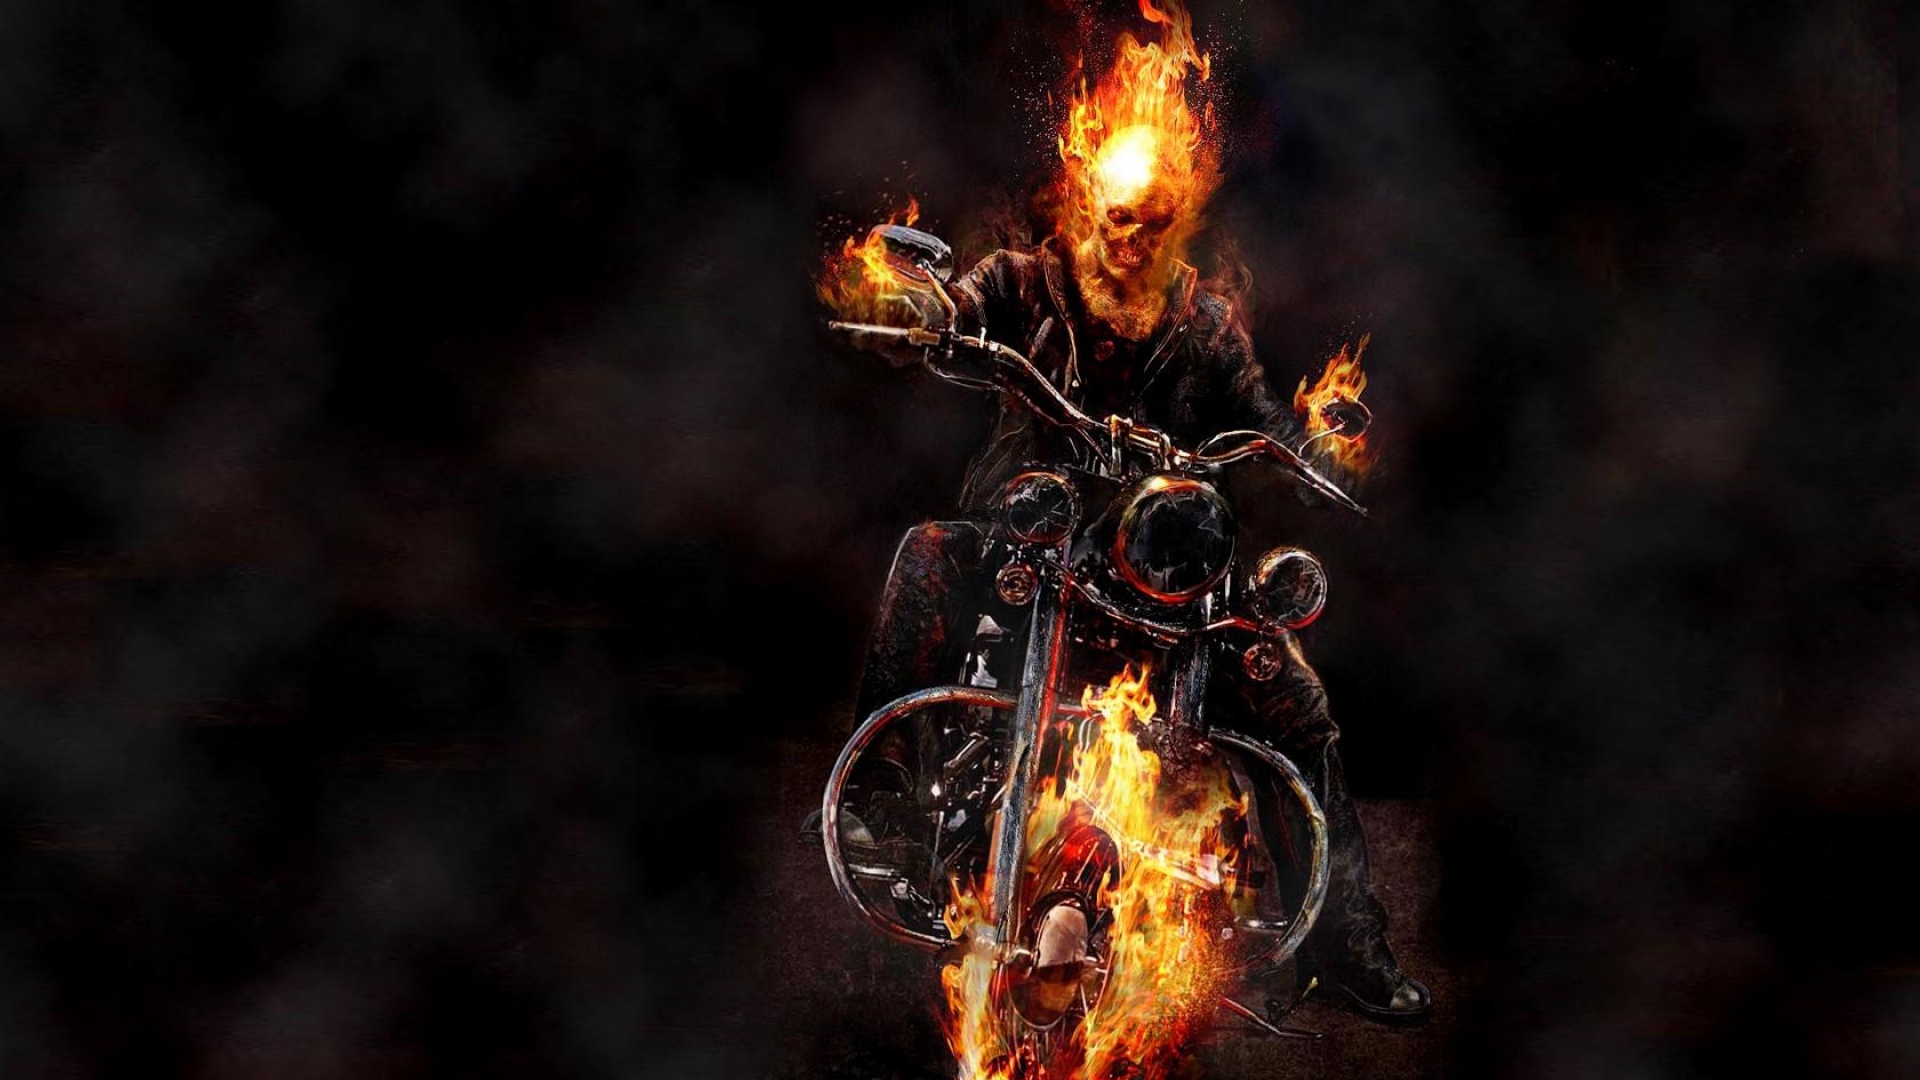 Motorcycle Ghost Rider Image Hd Wallpaper - Ghost Rider Wallpaper In Full Hd - HD Wallpaper 